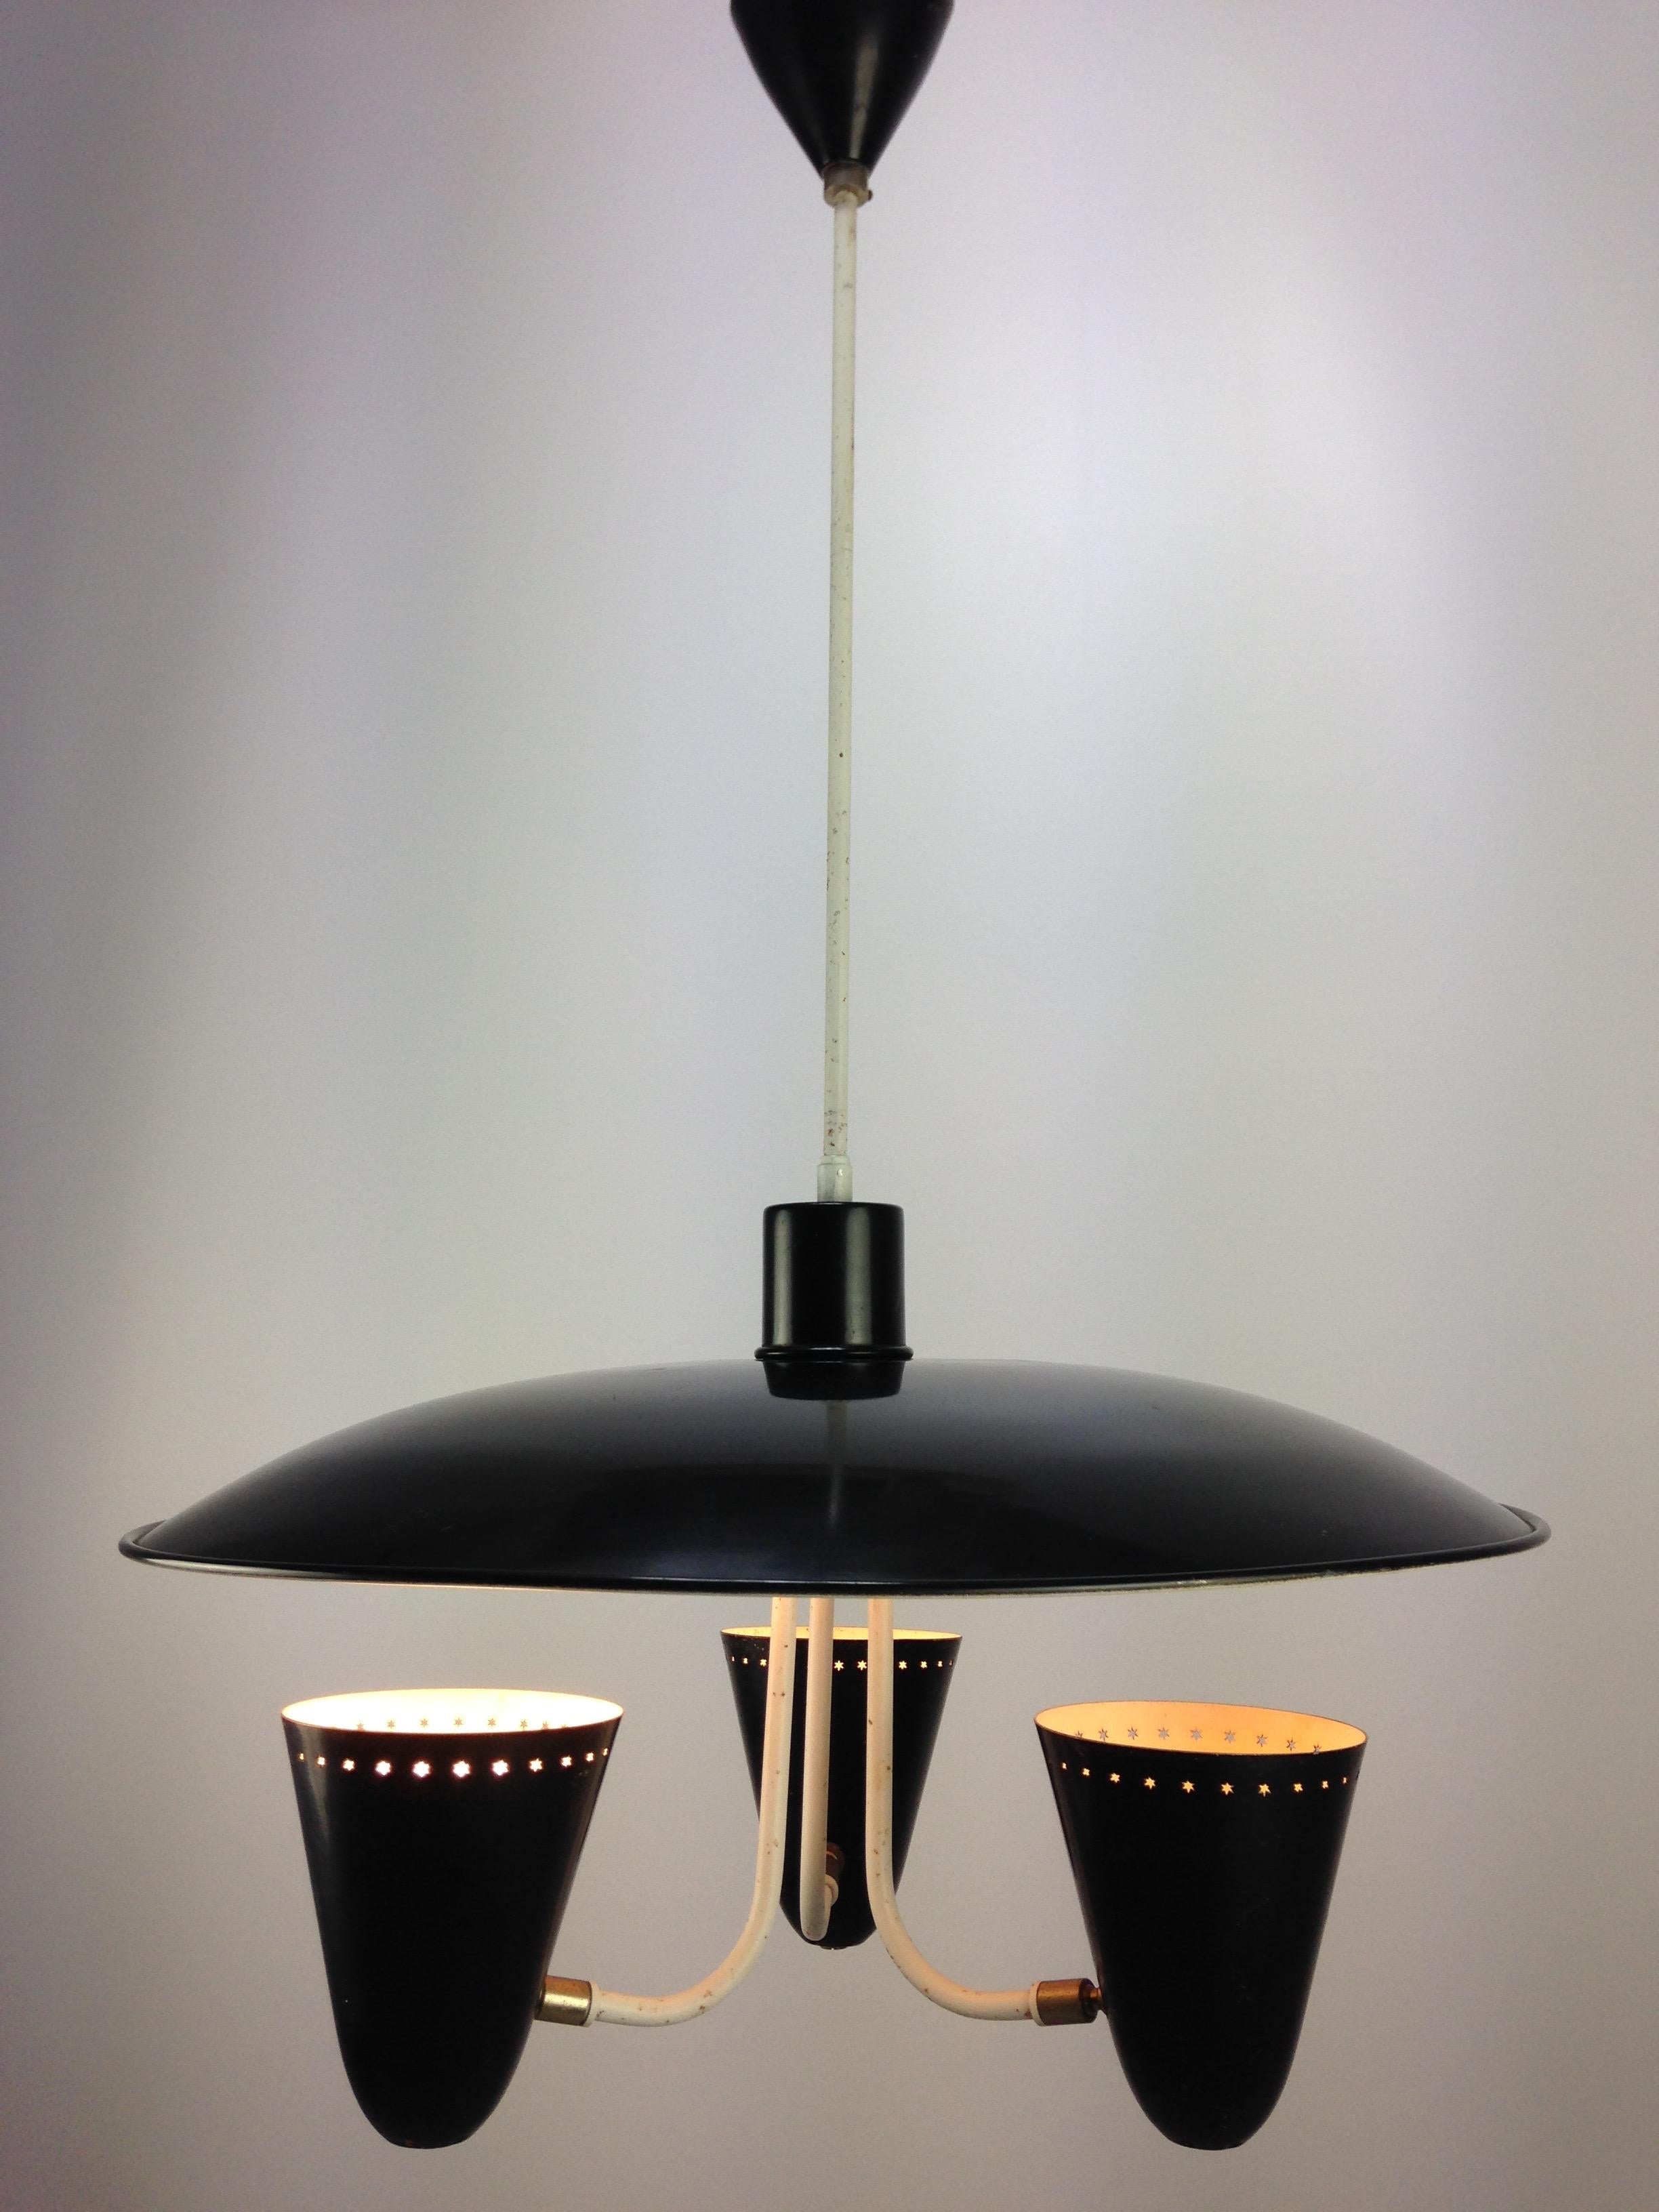 Dutch Mid Century Ceiling Light by H. Th. J. A. Busquet for Hala, 1950's For Sale